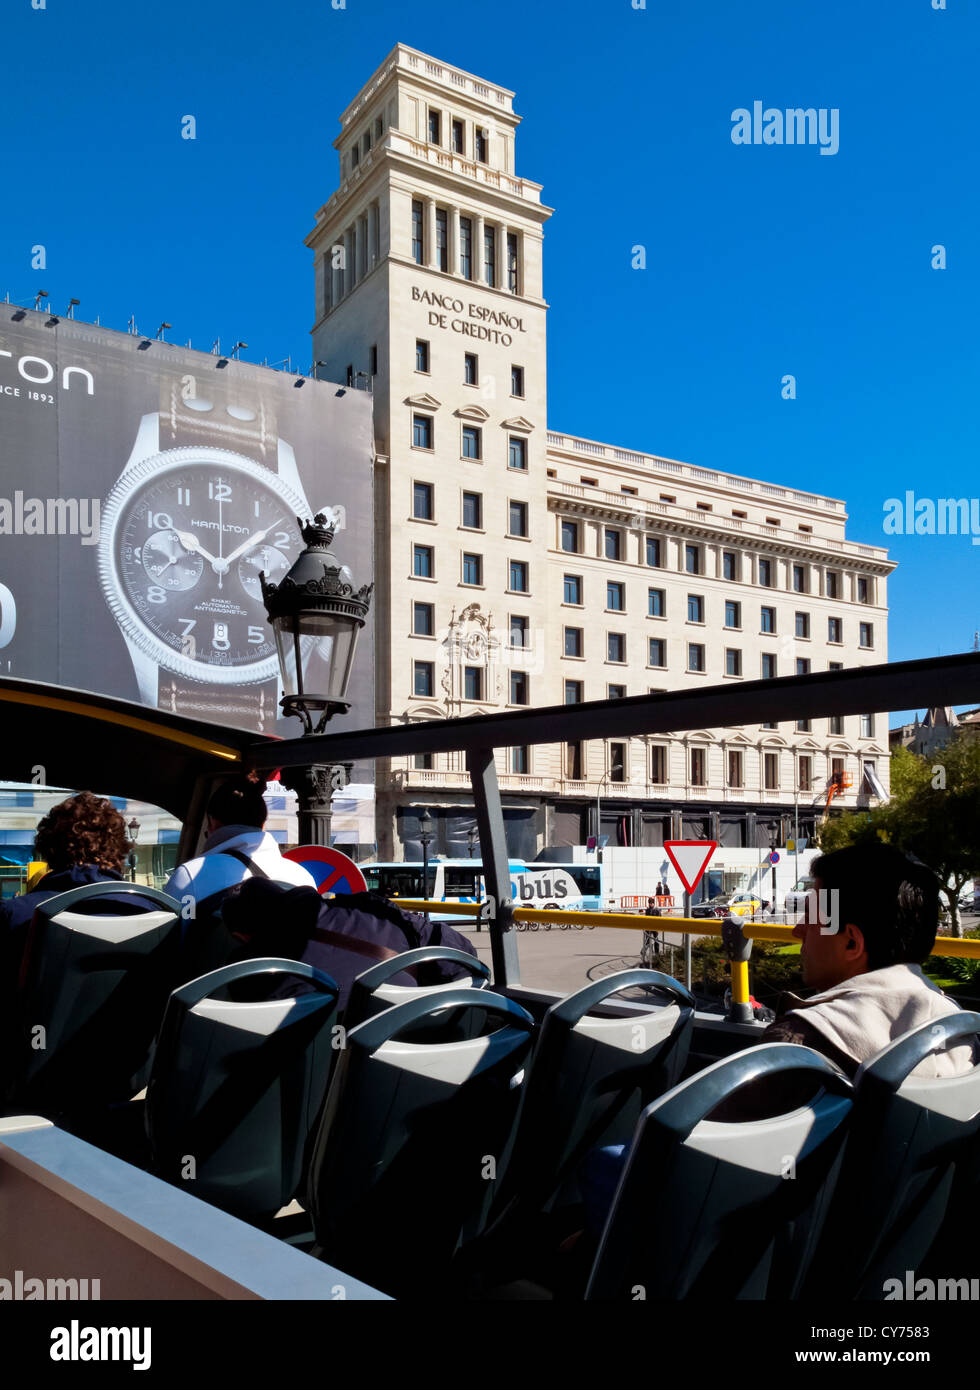 Open top tourist bus used to transport visitors around the city centre in Barcelona Spain Stock Photo